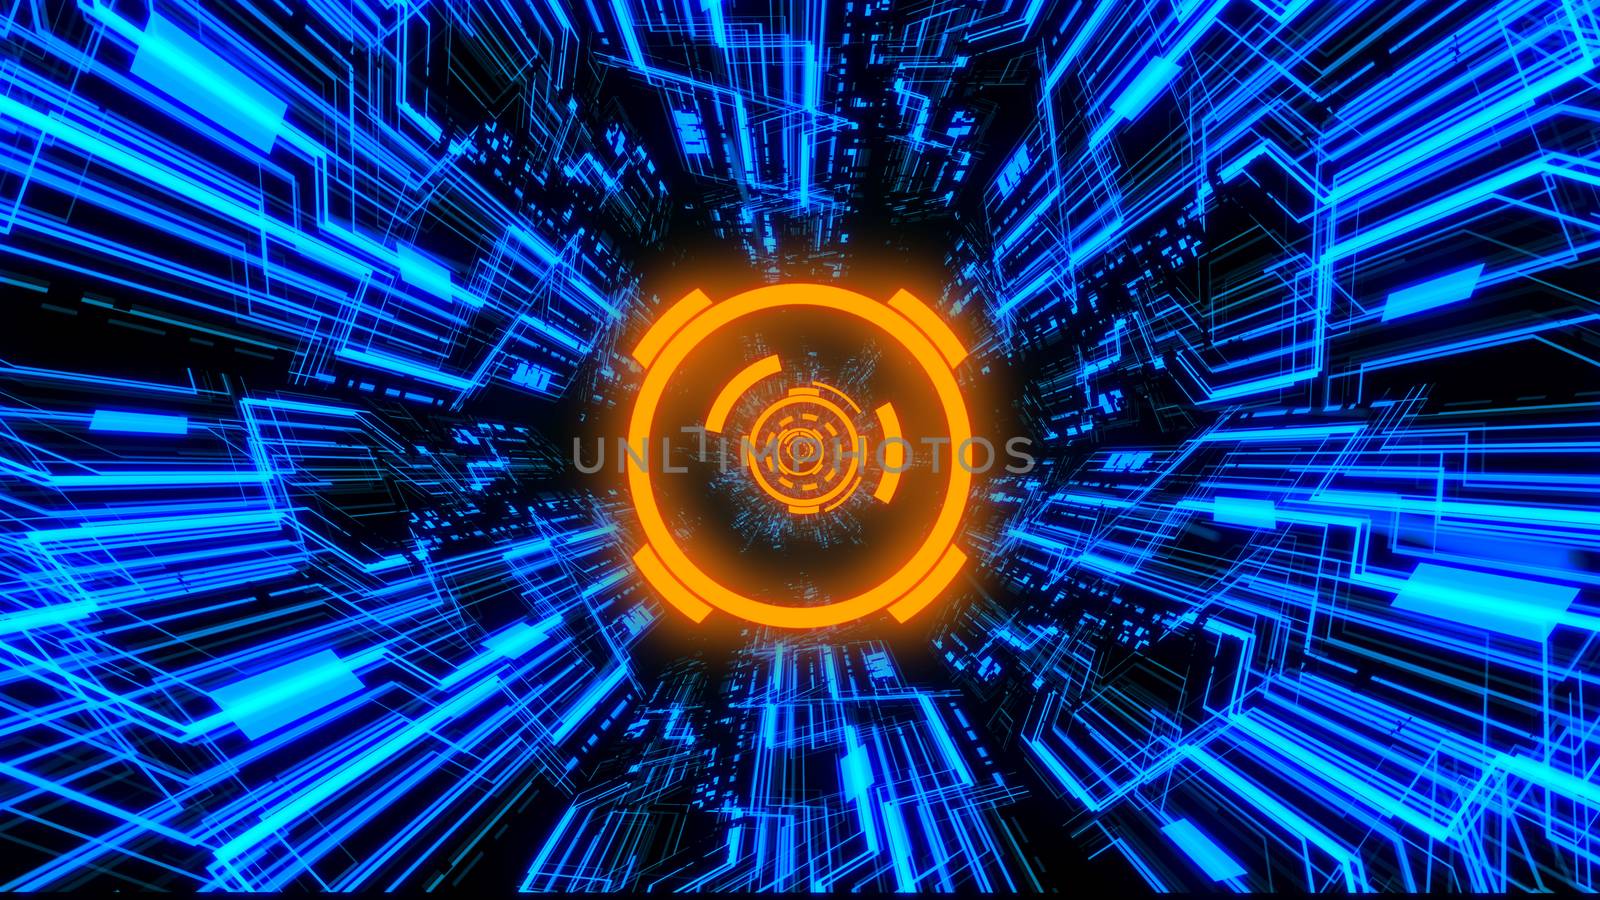 3D Digital Circuit System Tunnels and Waves with Digital Circles in the middle in Orange-Blue color theme Ver.1